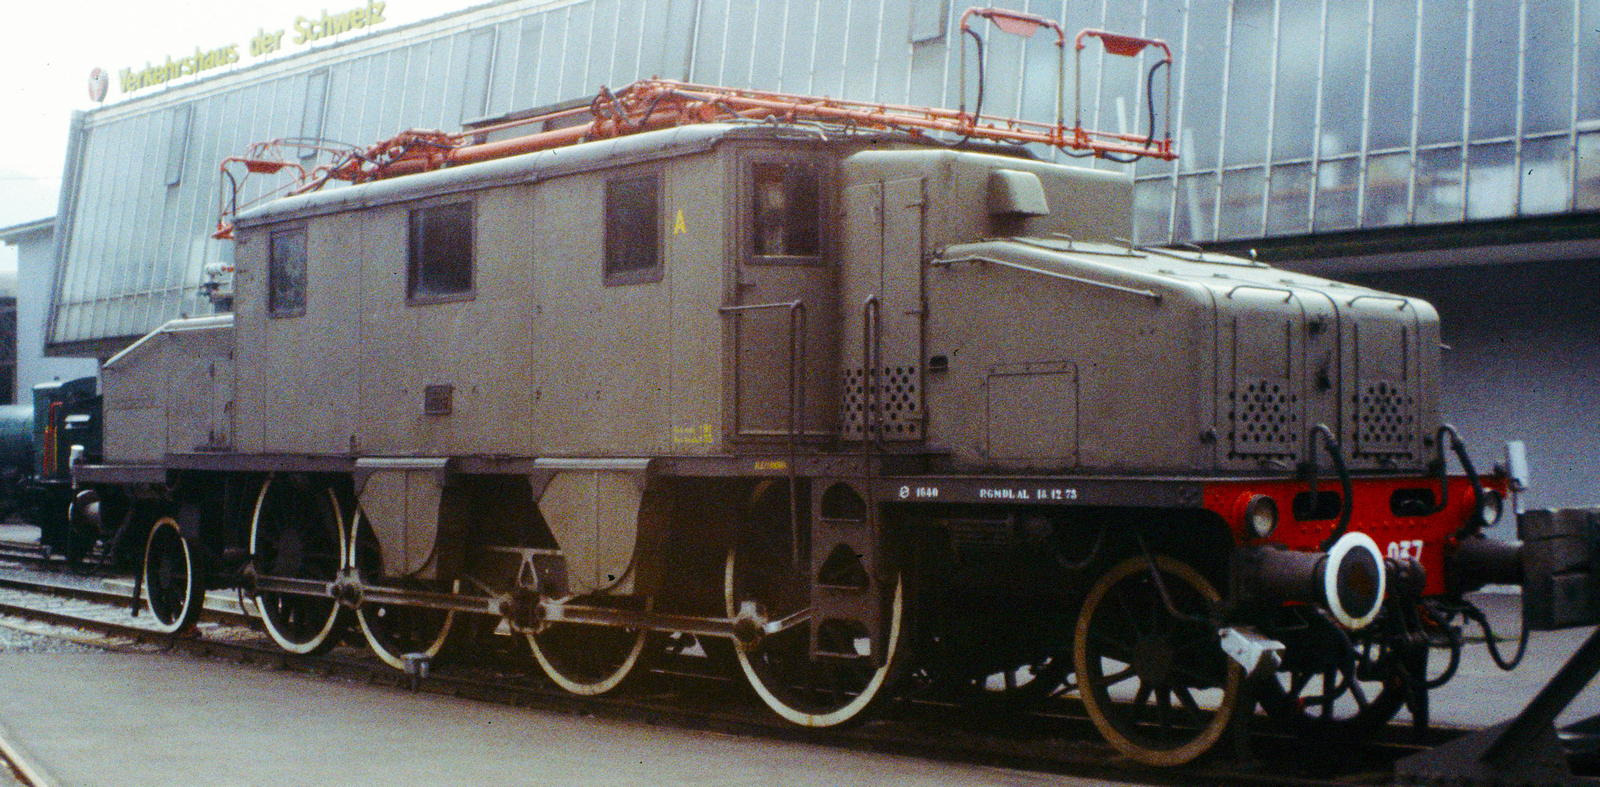 E.431.037 in 1995 in the Swiss Museum of Transport